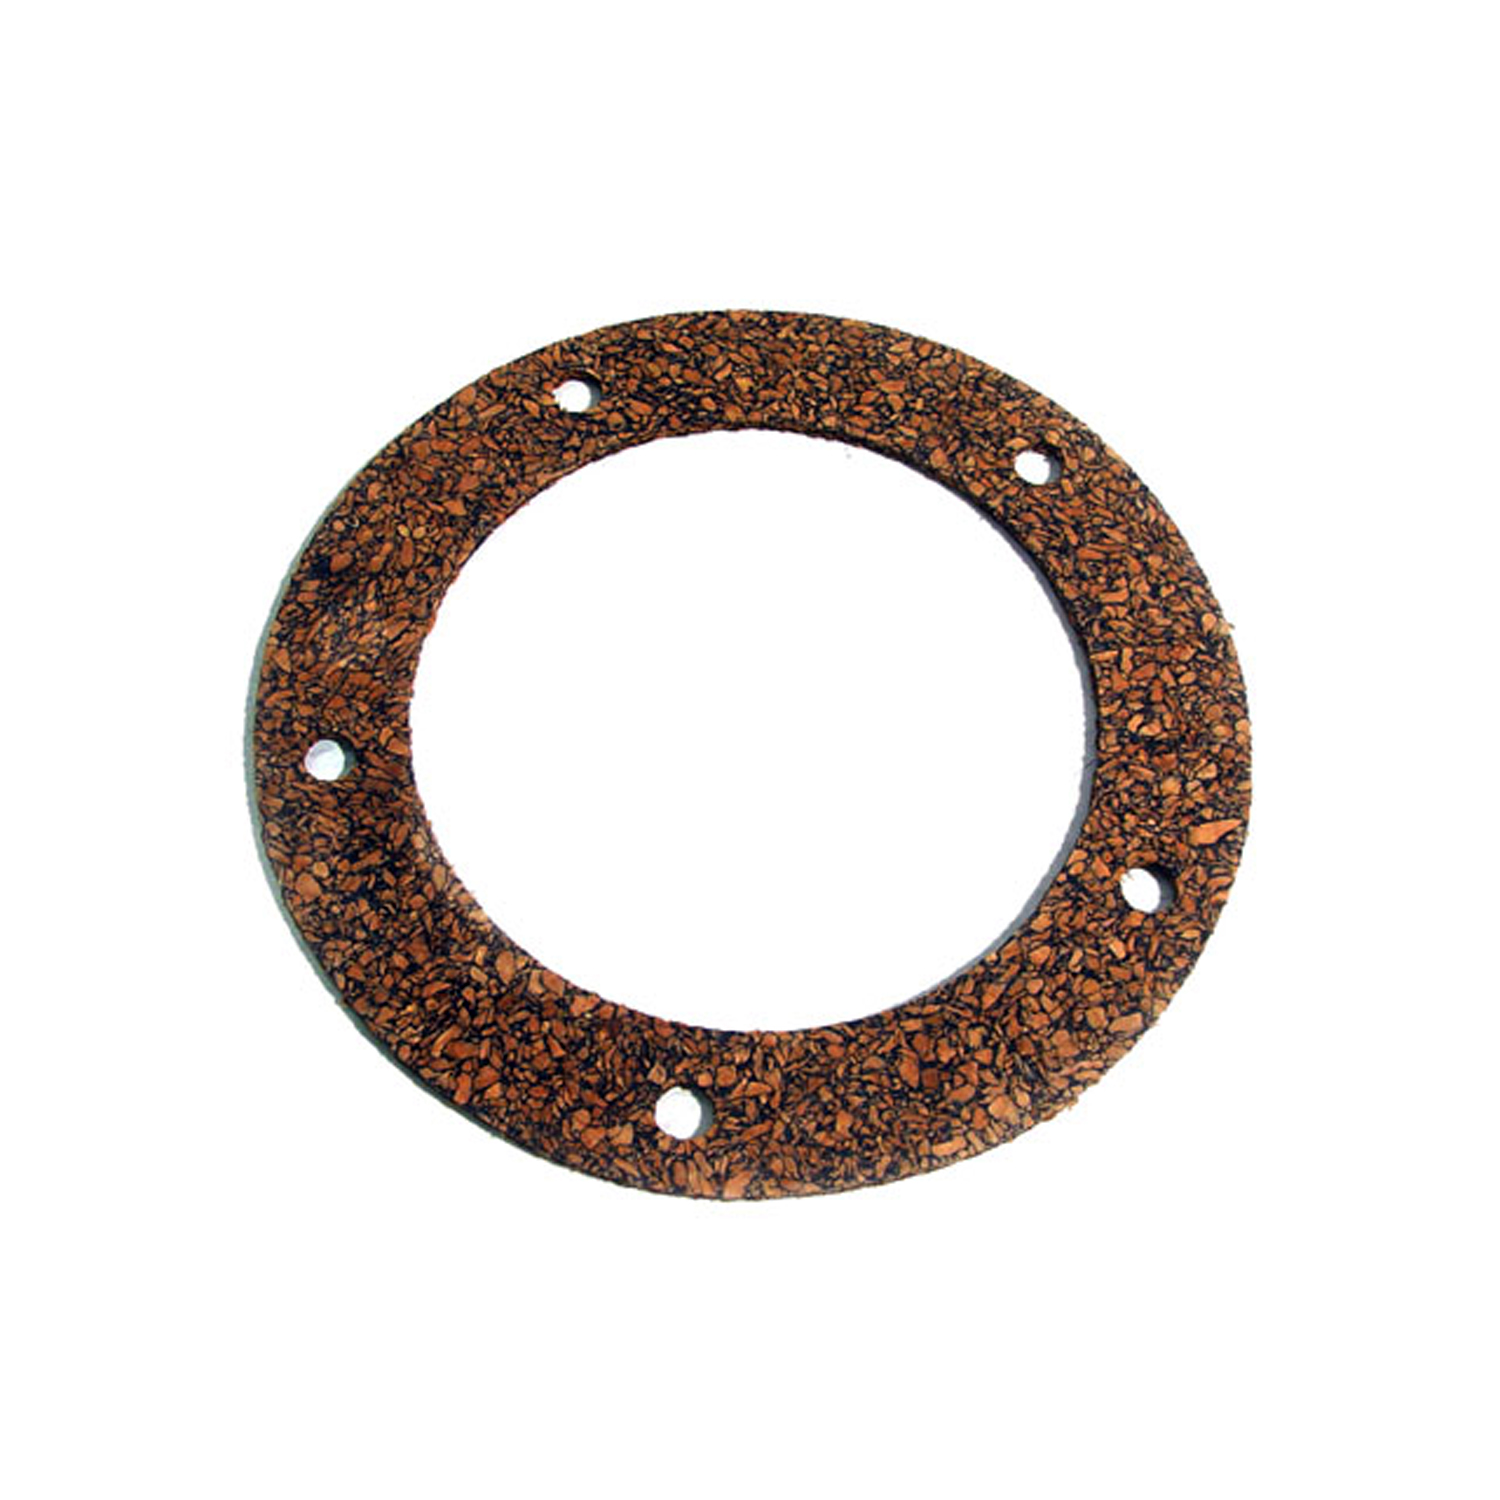 1972 Ford Mustang Gas Neck to Body Gasket.  Made of Cork.  2-1/2 I.D-GF 46